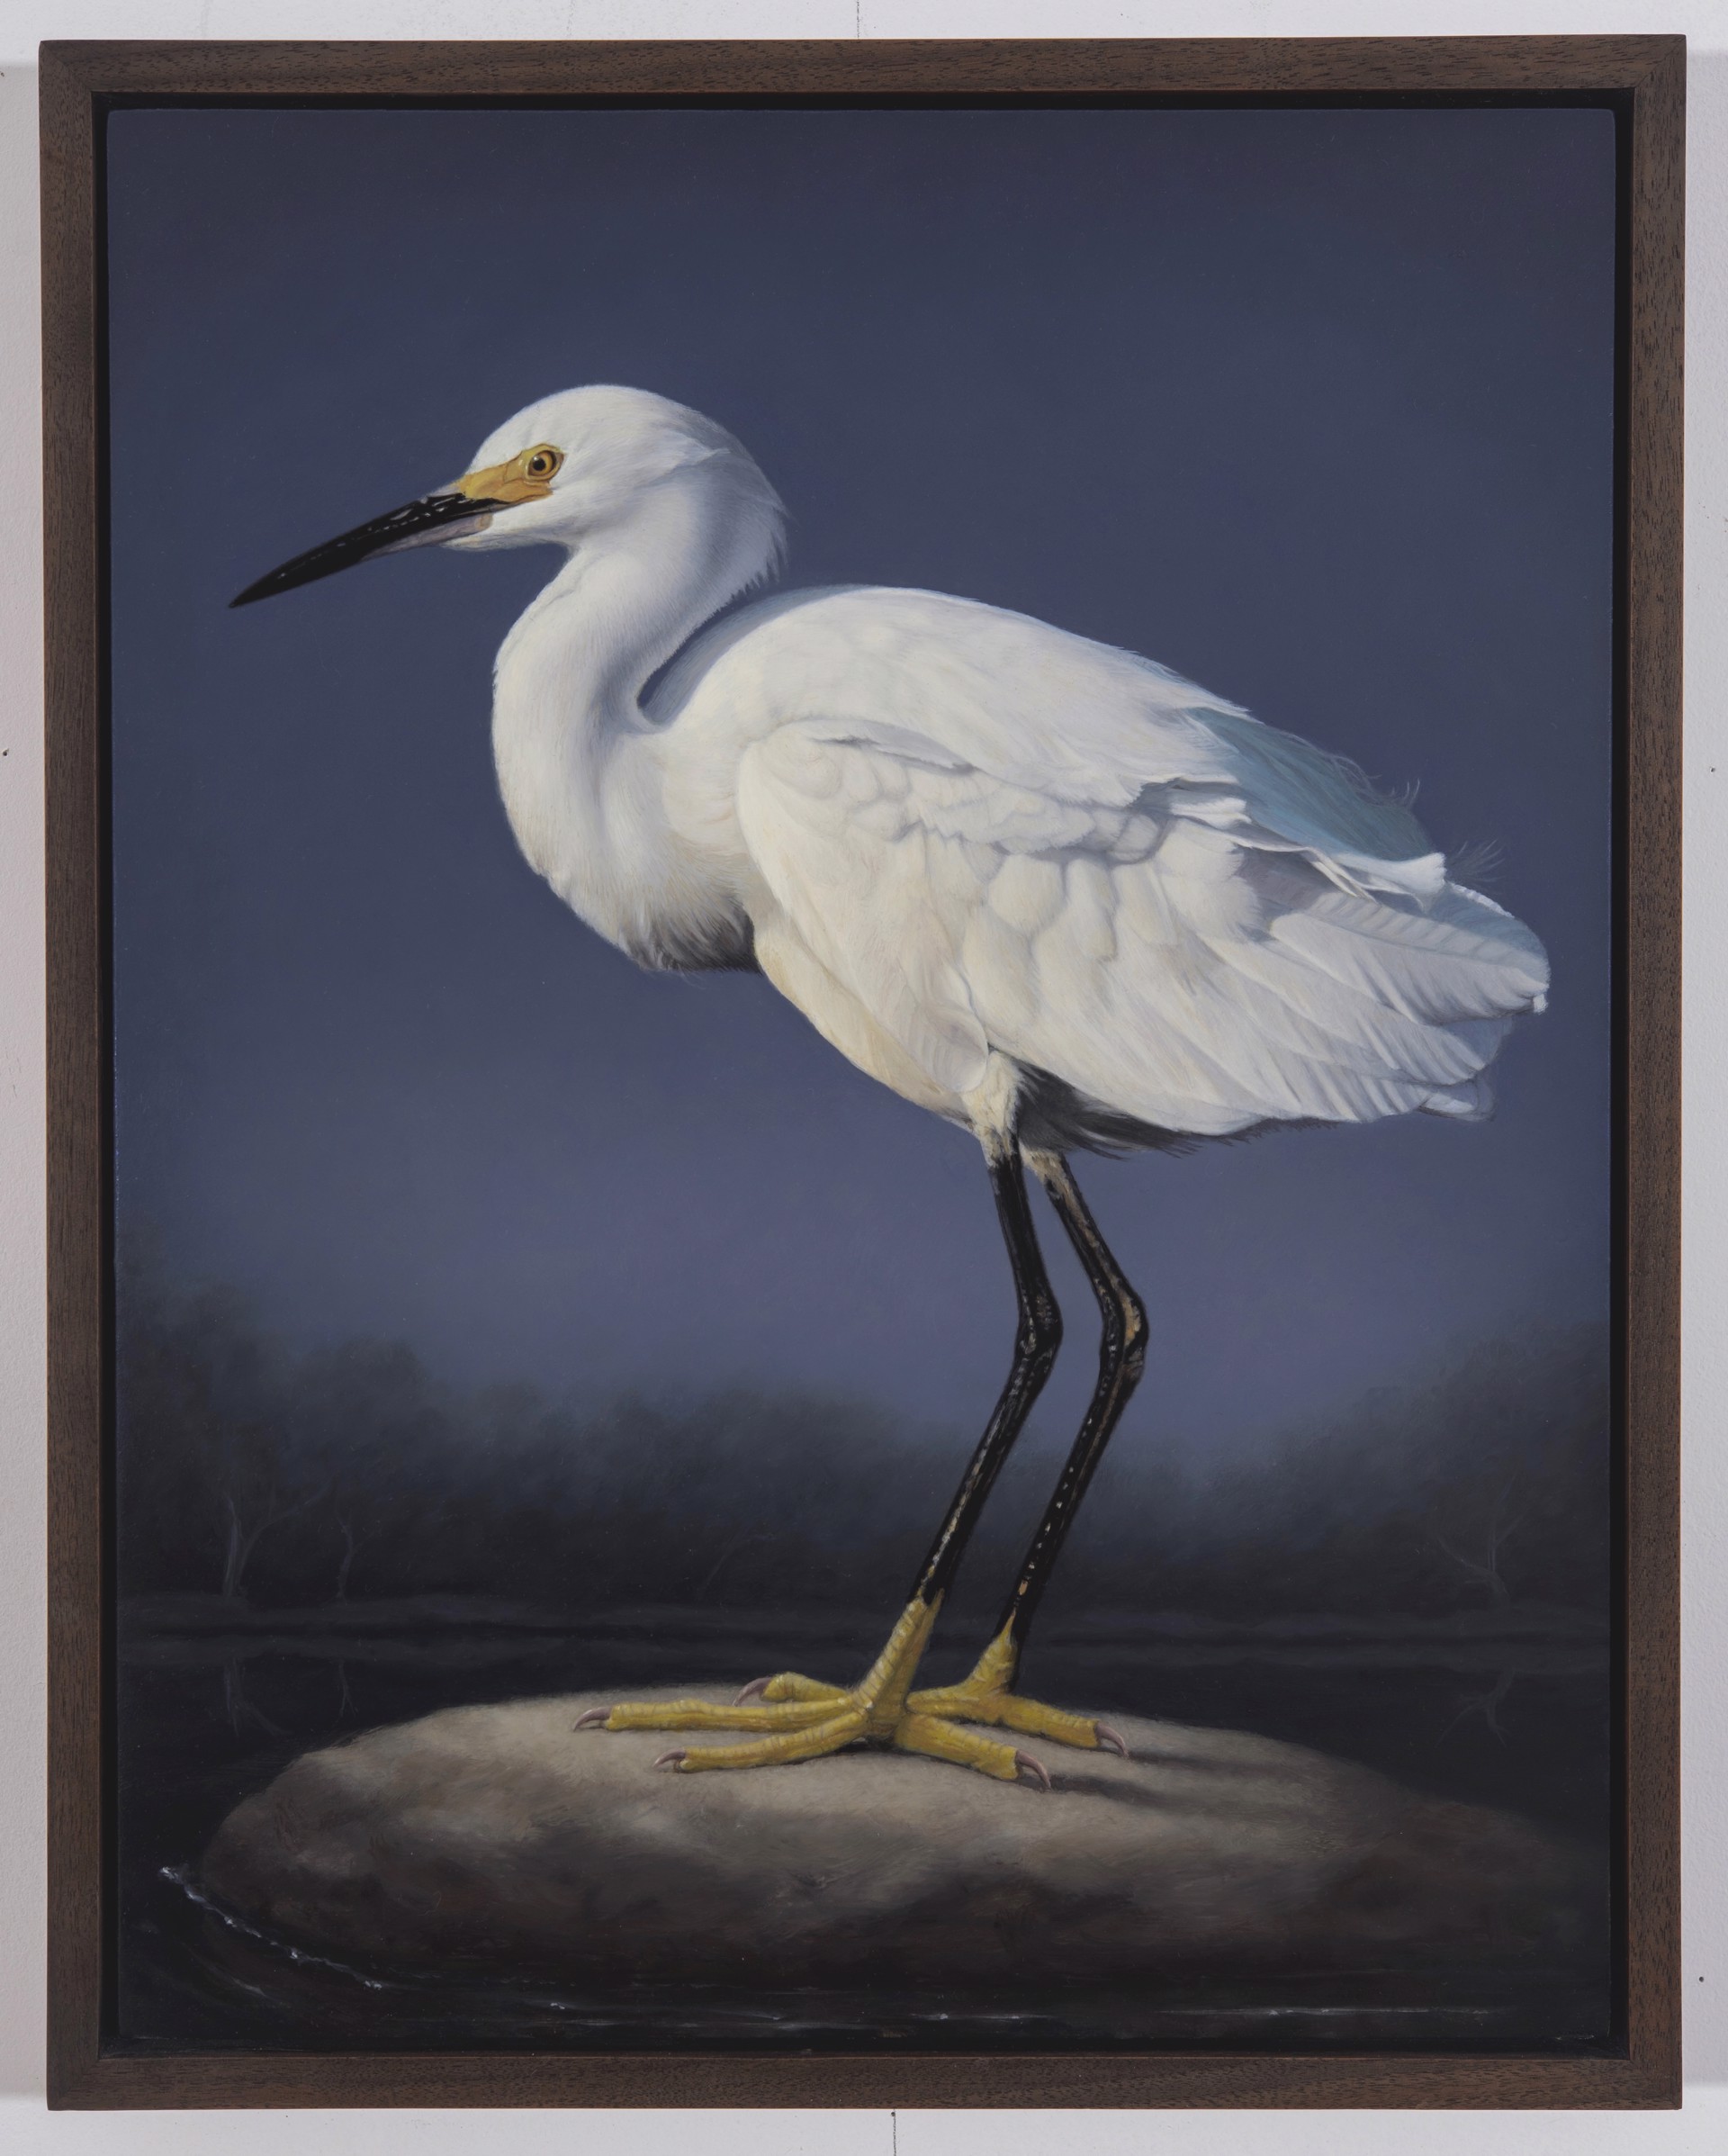 Snowy Egret by Susan McDonnell